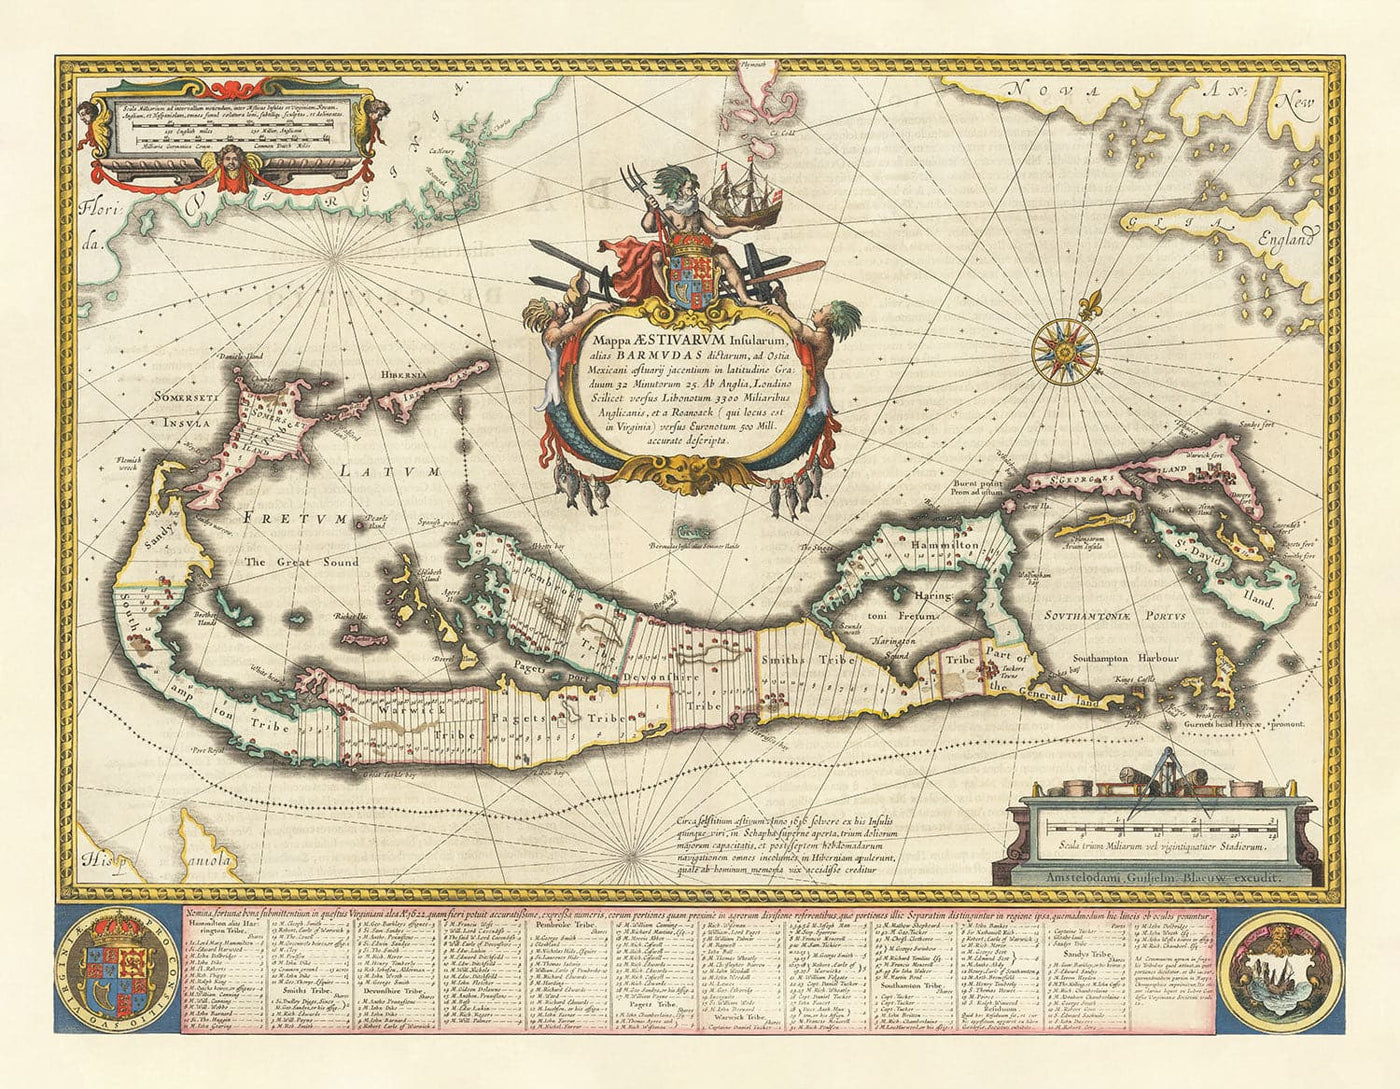 Old Map of Bermuda, 1640 by Willem Blaeu - Somers Isles Tribes & Parishes